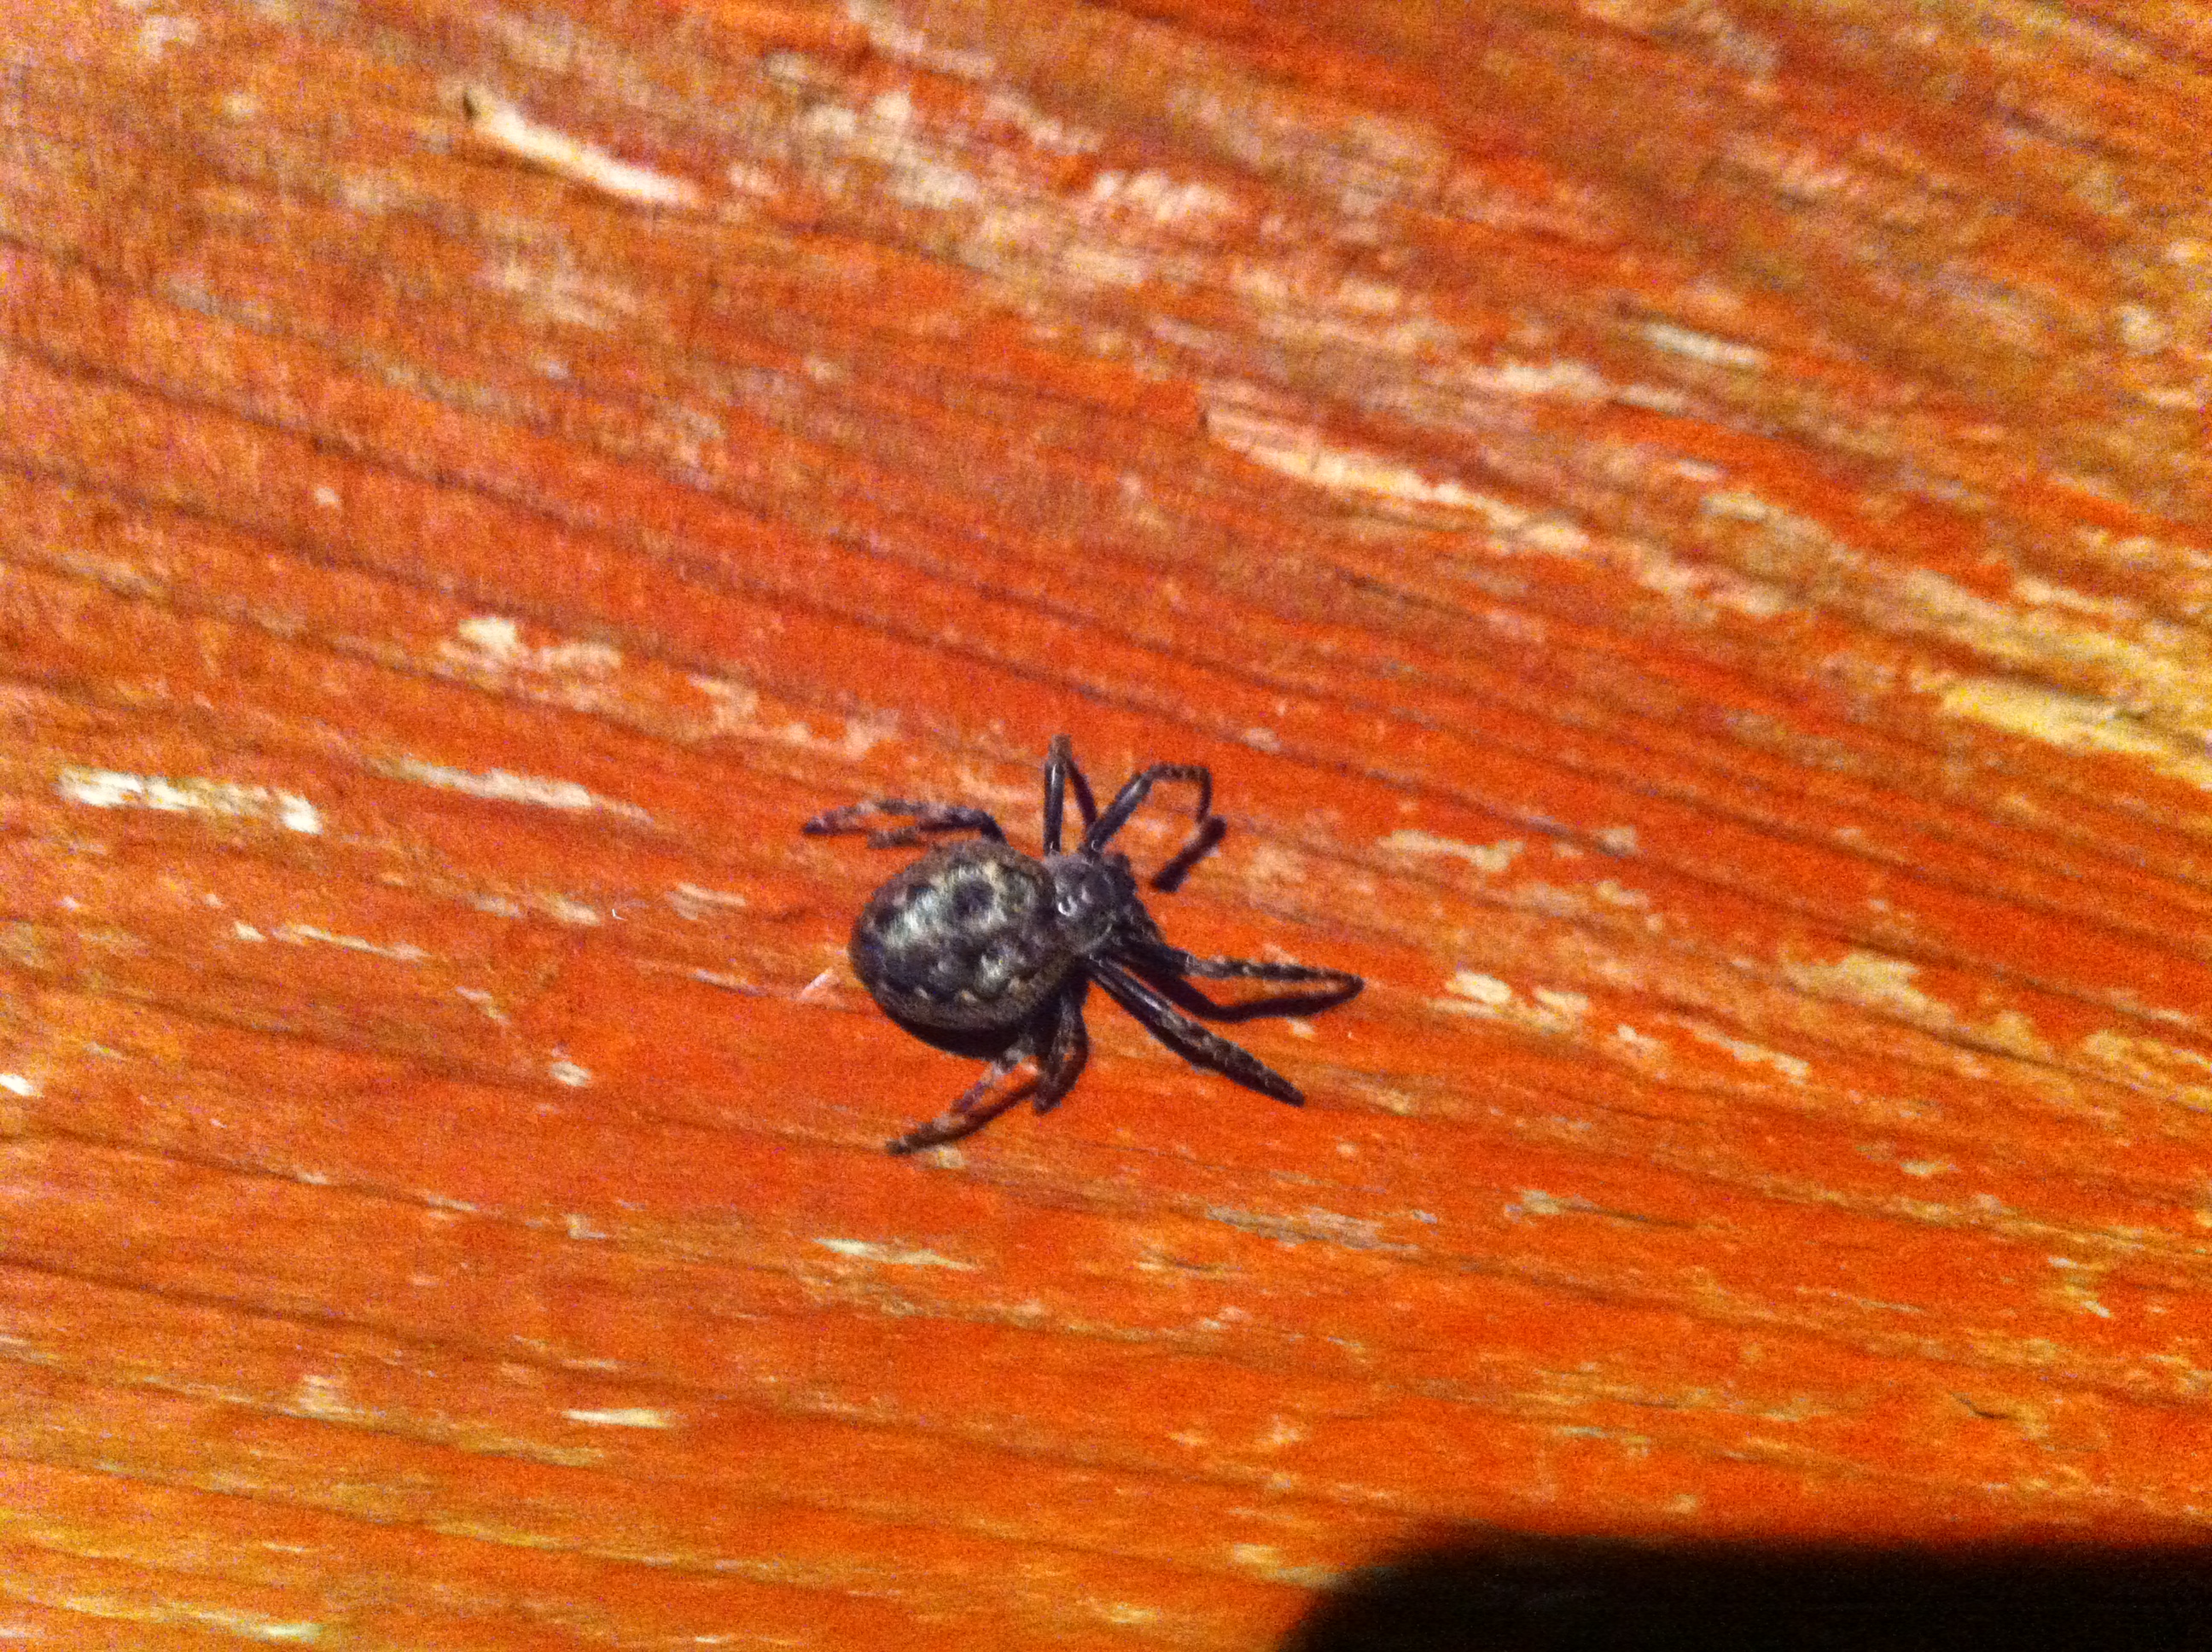 Can anyone recognize this spider?